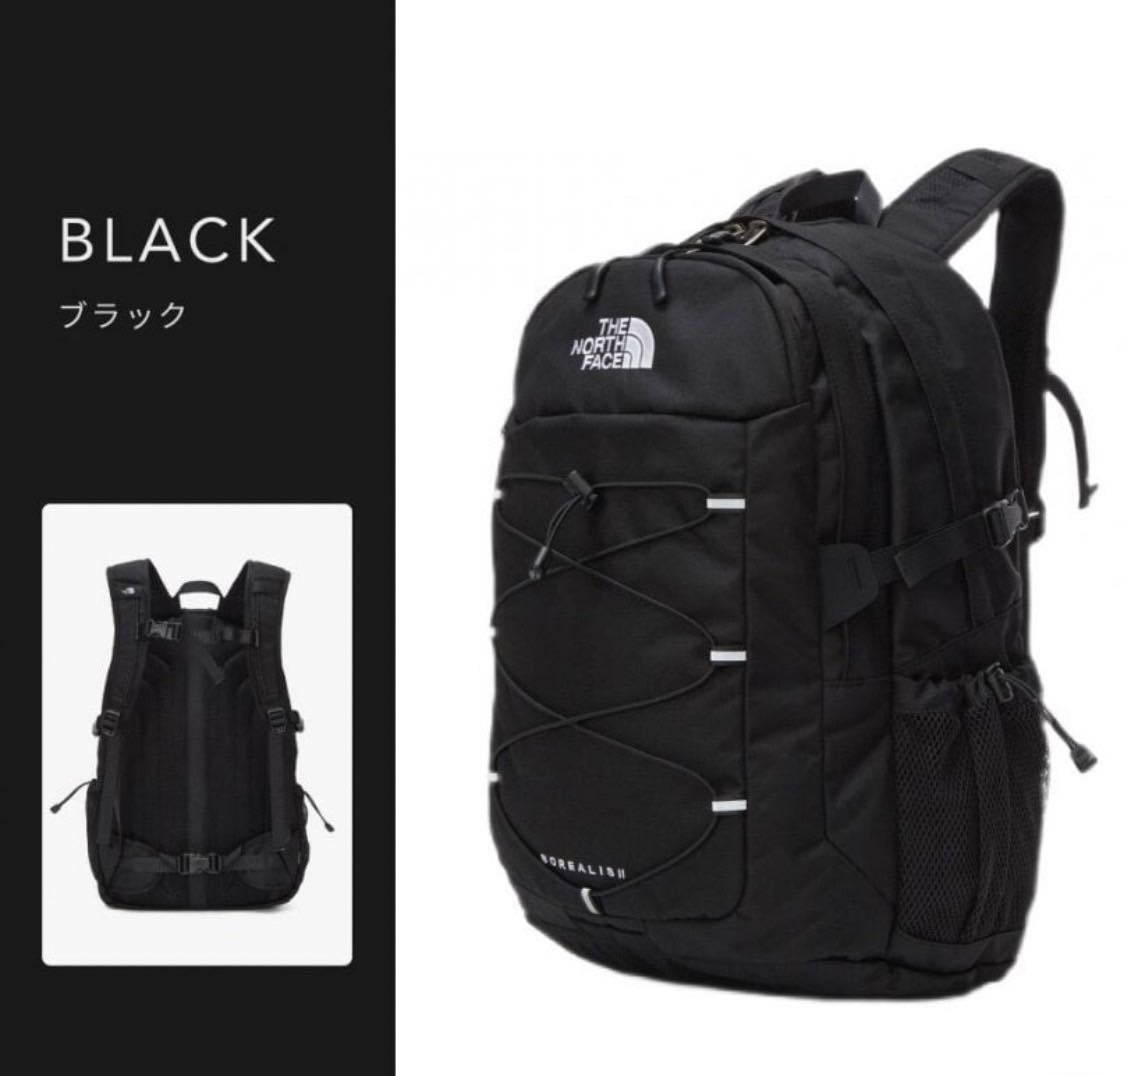 THE NORTH FACE ザ・ノース・フェイス NM2DN53A WHITE LABEL BOREALIS II ボレアリス2 バックパック リュックサック 30L 大容量